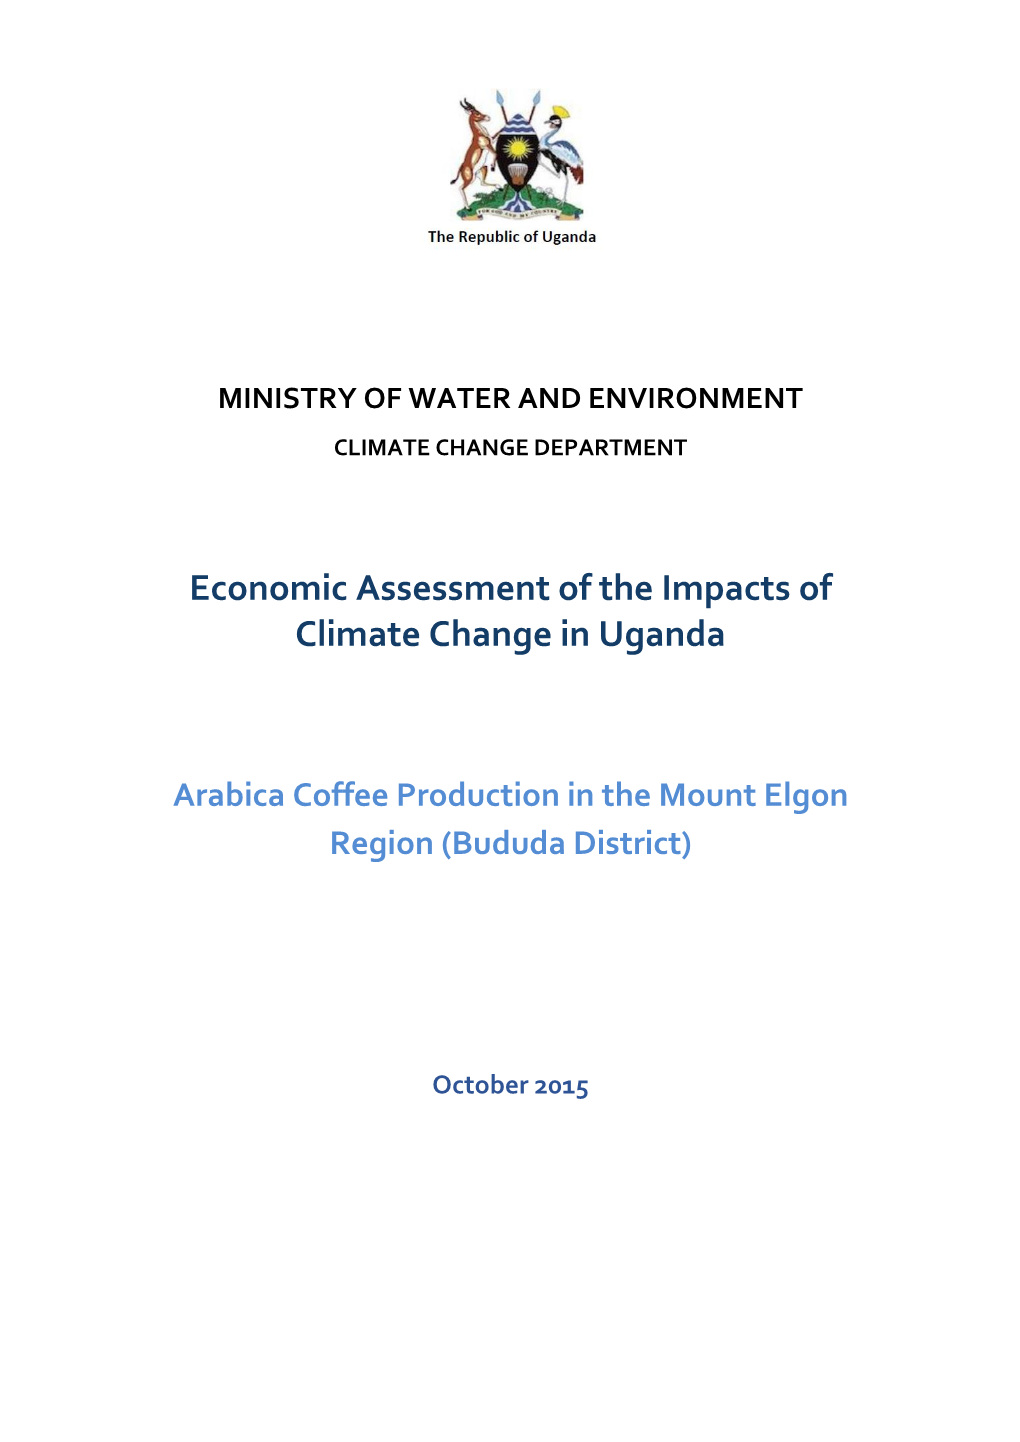 Economic Assessment of the Impacts of Climate Change in Uganda